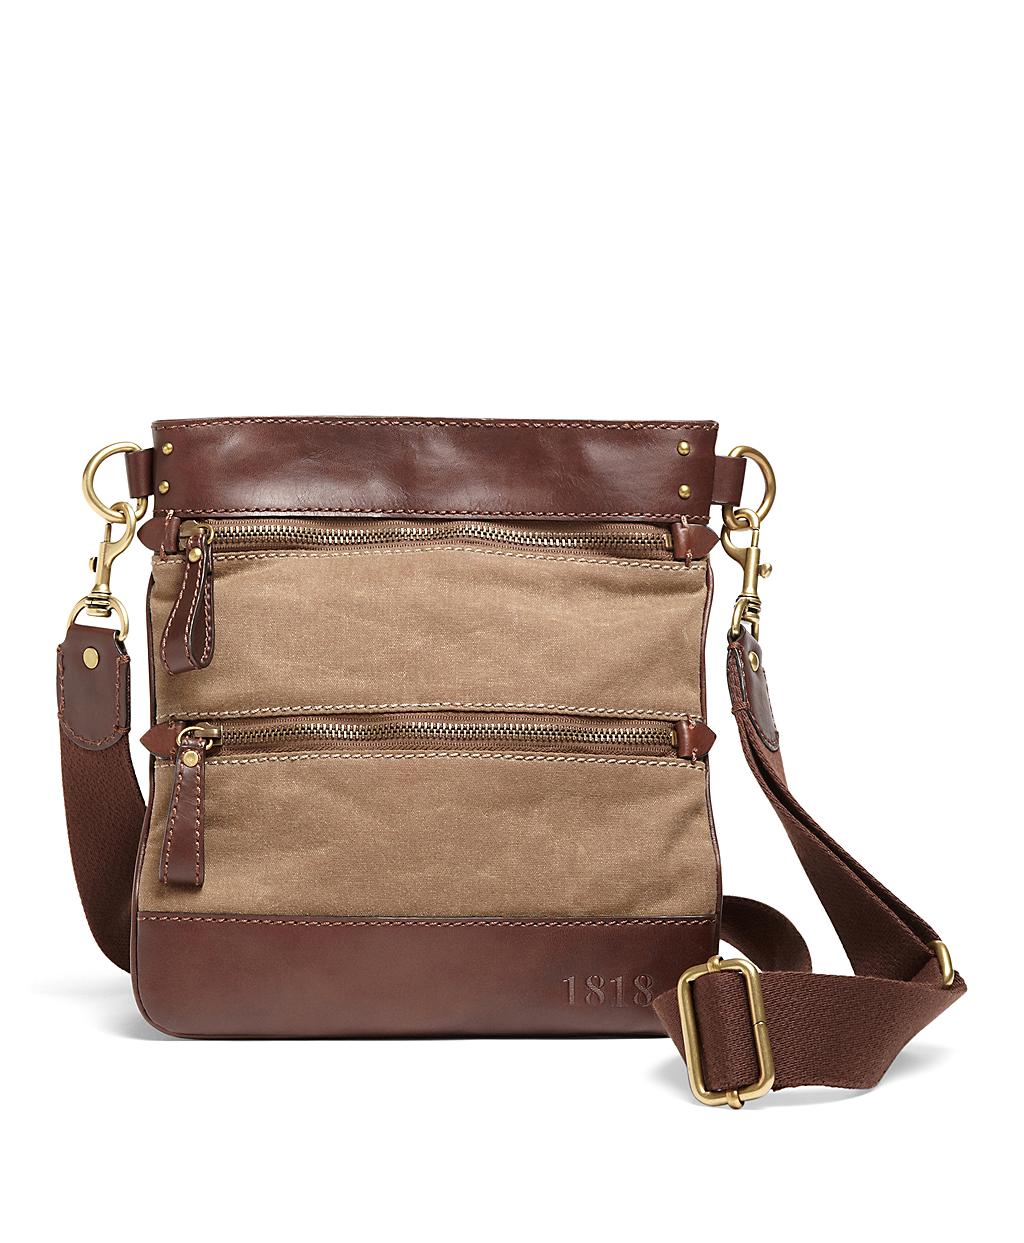 Lyst - Brooks Brothers Waxed Cotton Canvas Crossbody Bag in Brown